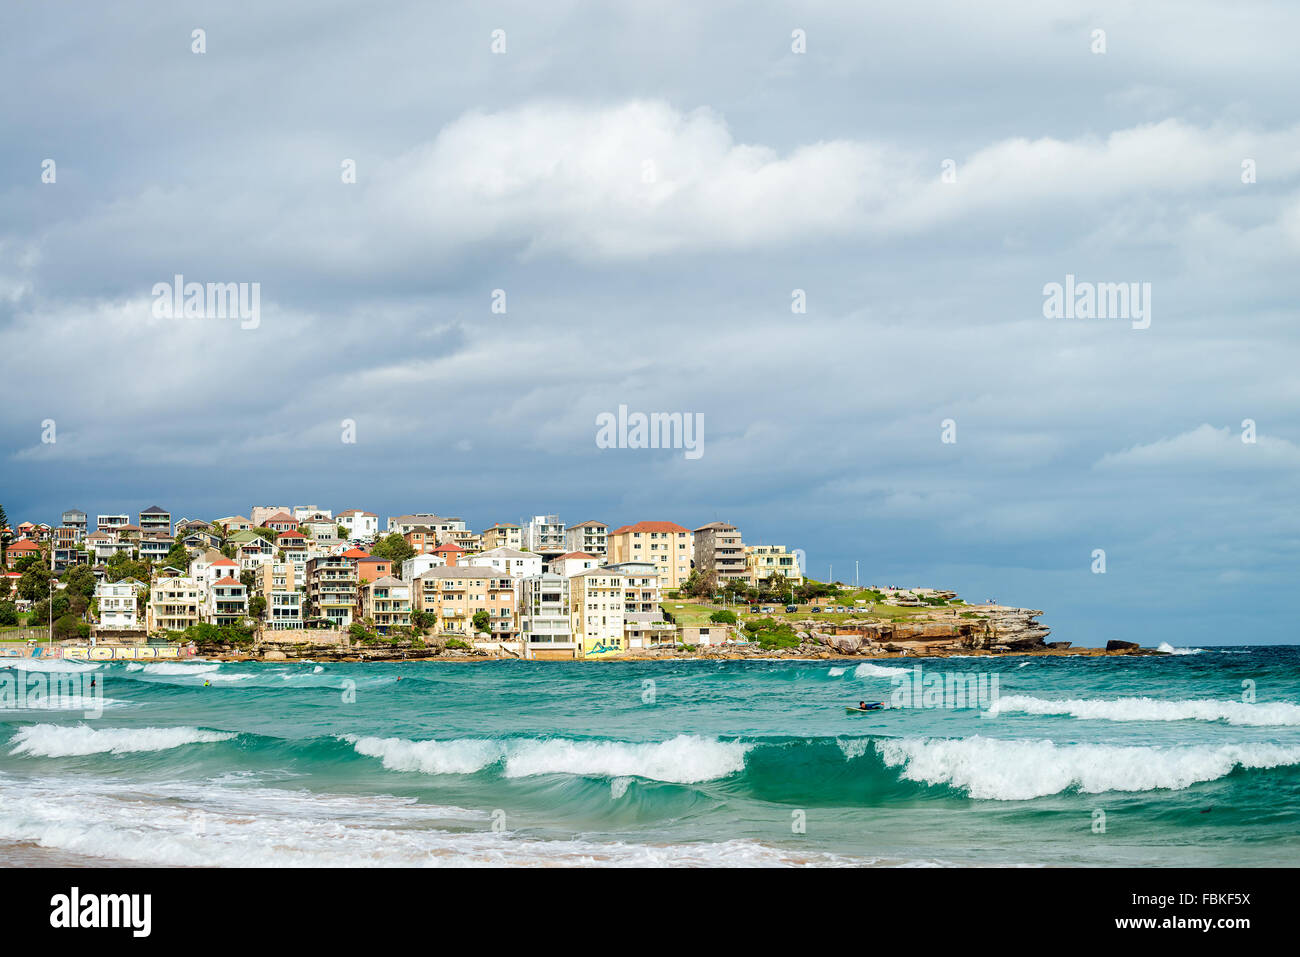 Sydney, Australia - November 8, 2015: Surfer in the waters of Bondi Beach. Bondi beach is one of the most famous places. Stock Photo